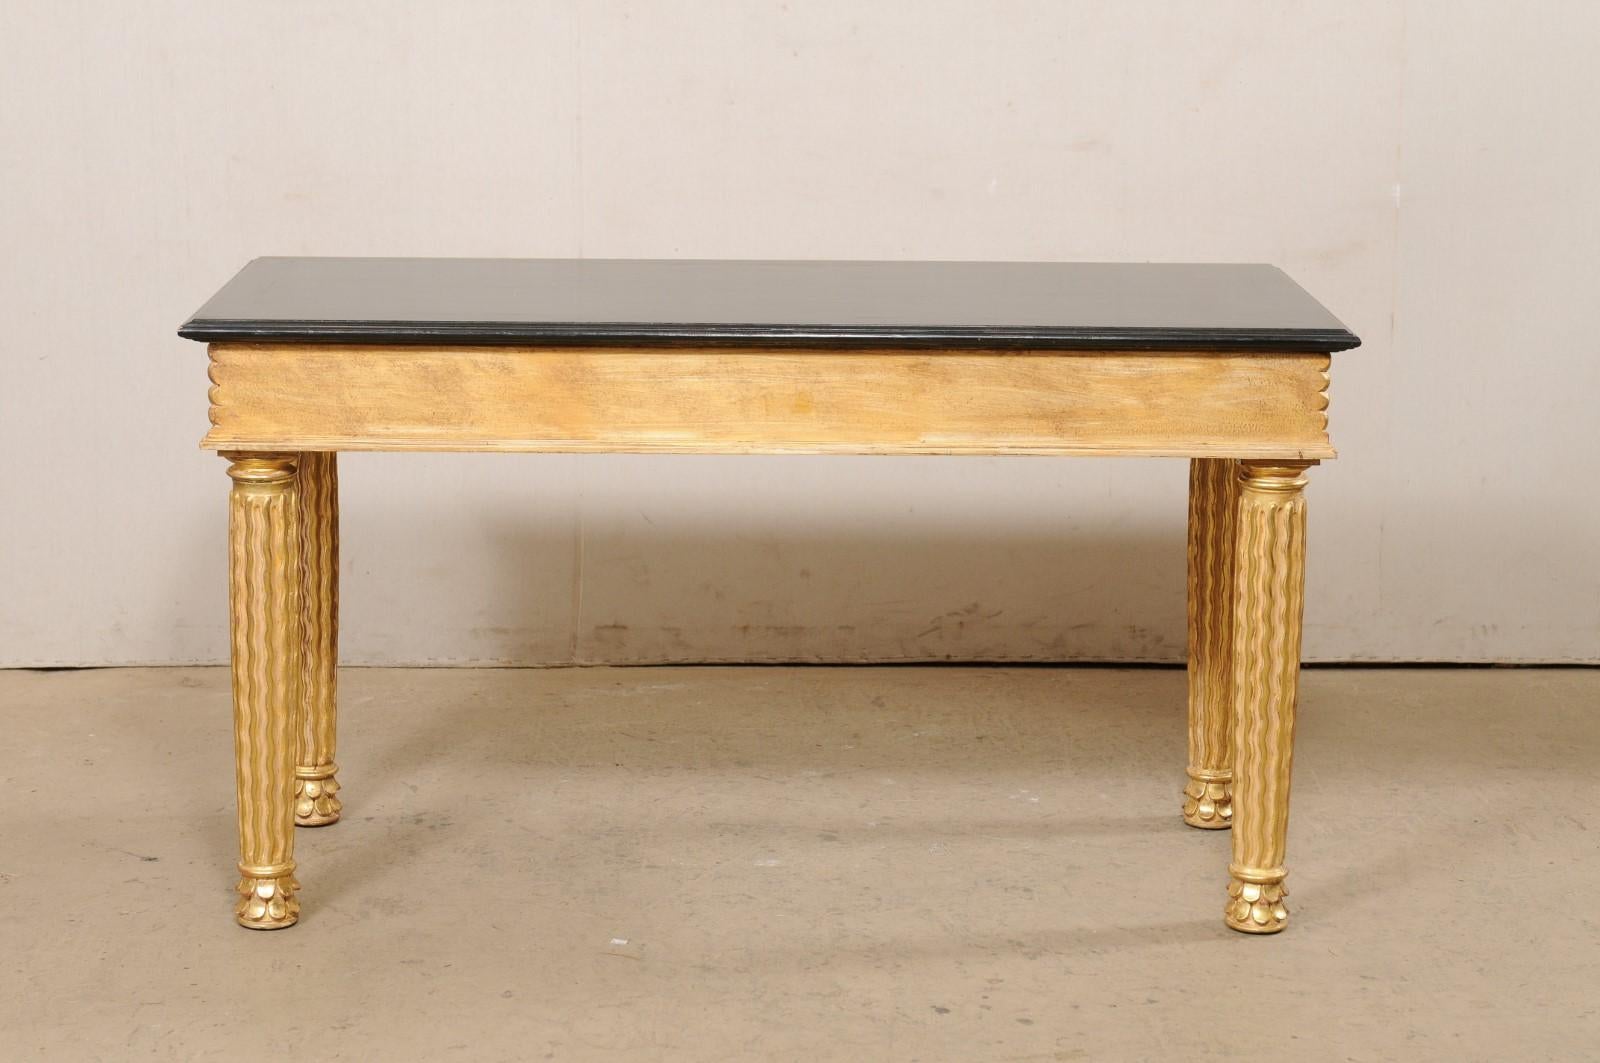 Italian Masterfully Hand-Carved Wooden Console Table with Real Gold Leafing For Sale 4